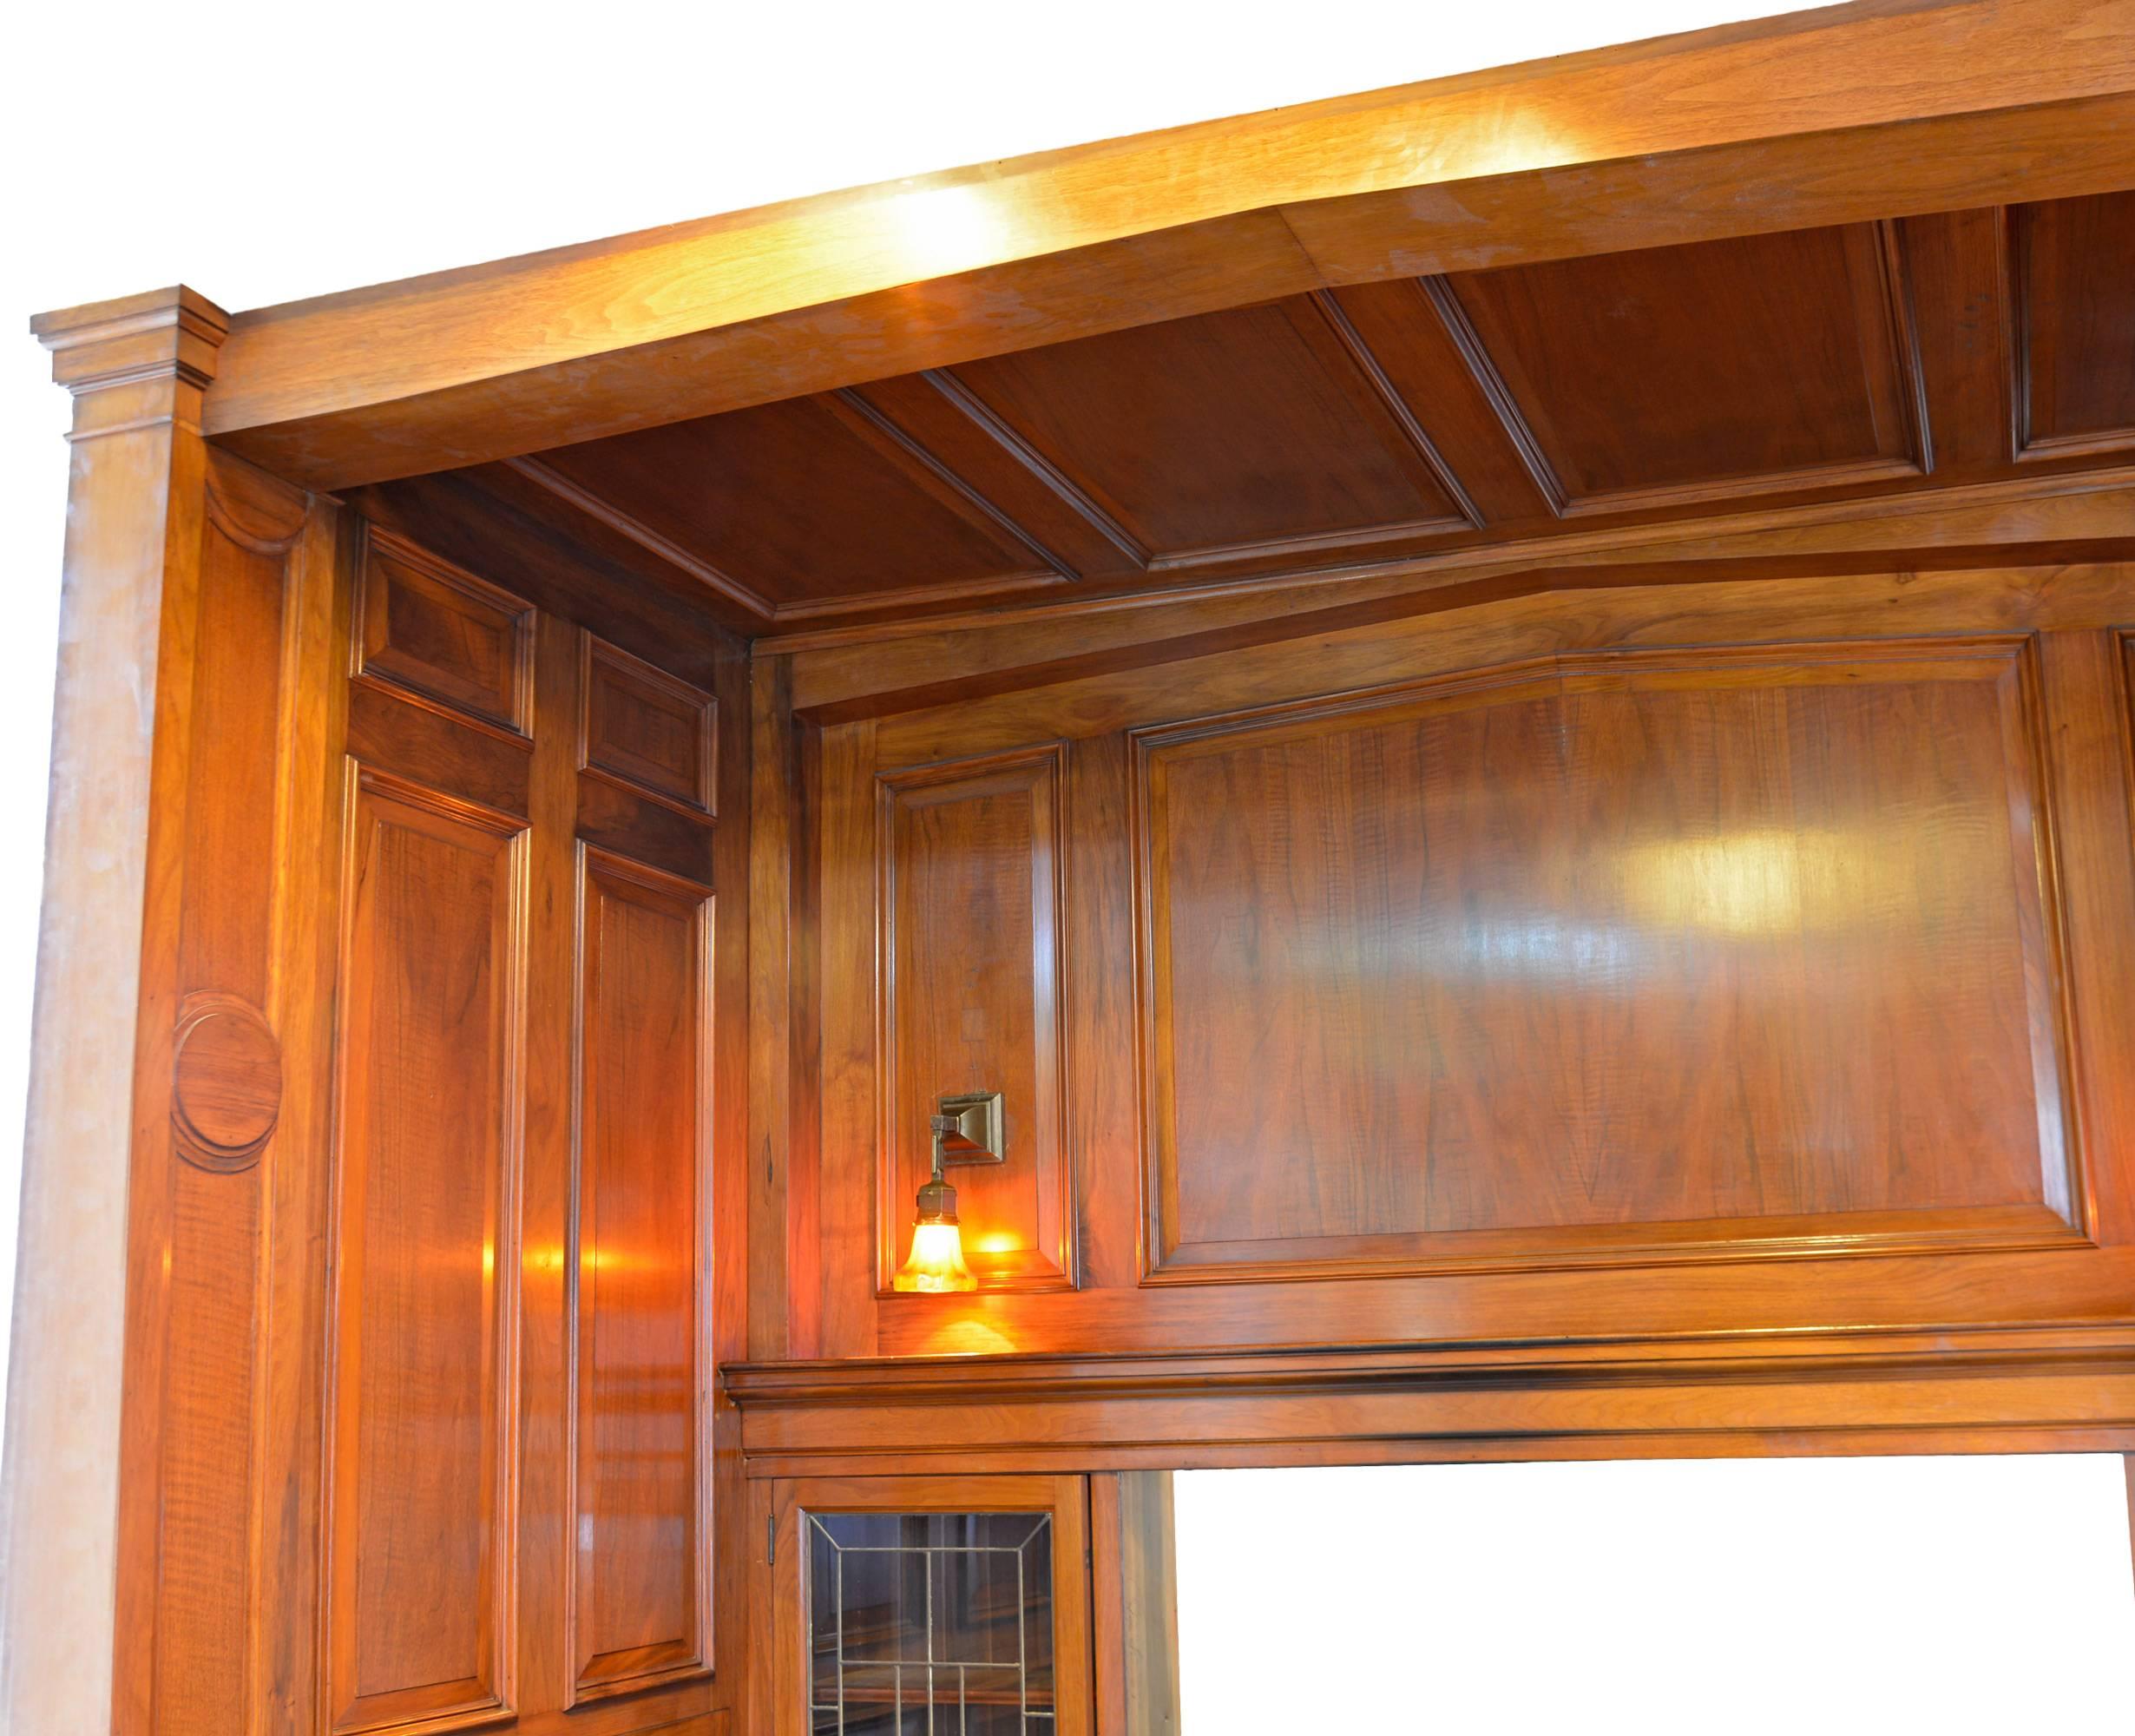 This complete walnut panelled inglennook was meticulously removed from a 1915 home. In wonderful condition, the handsome nook includes a panelled ceiling and two built-in leaded glass bookcases on either side of fireplace opening. Shown with